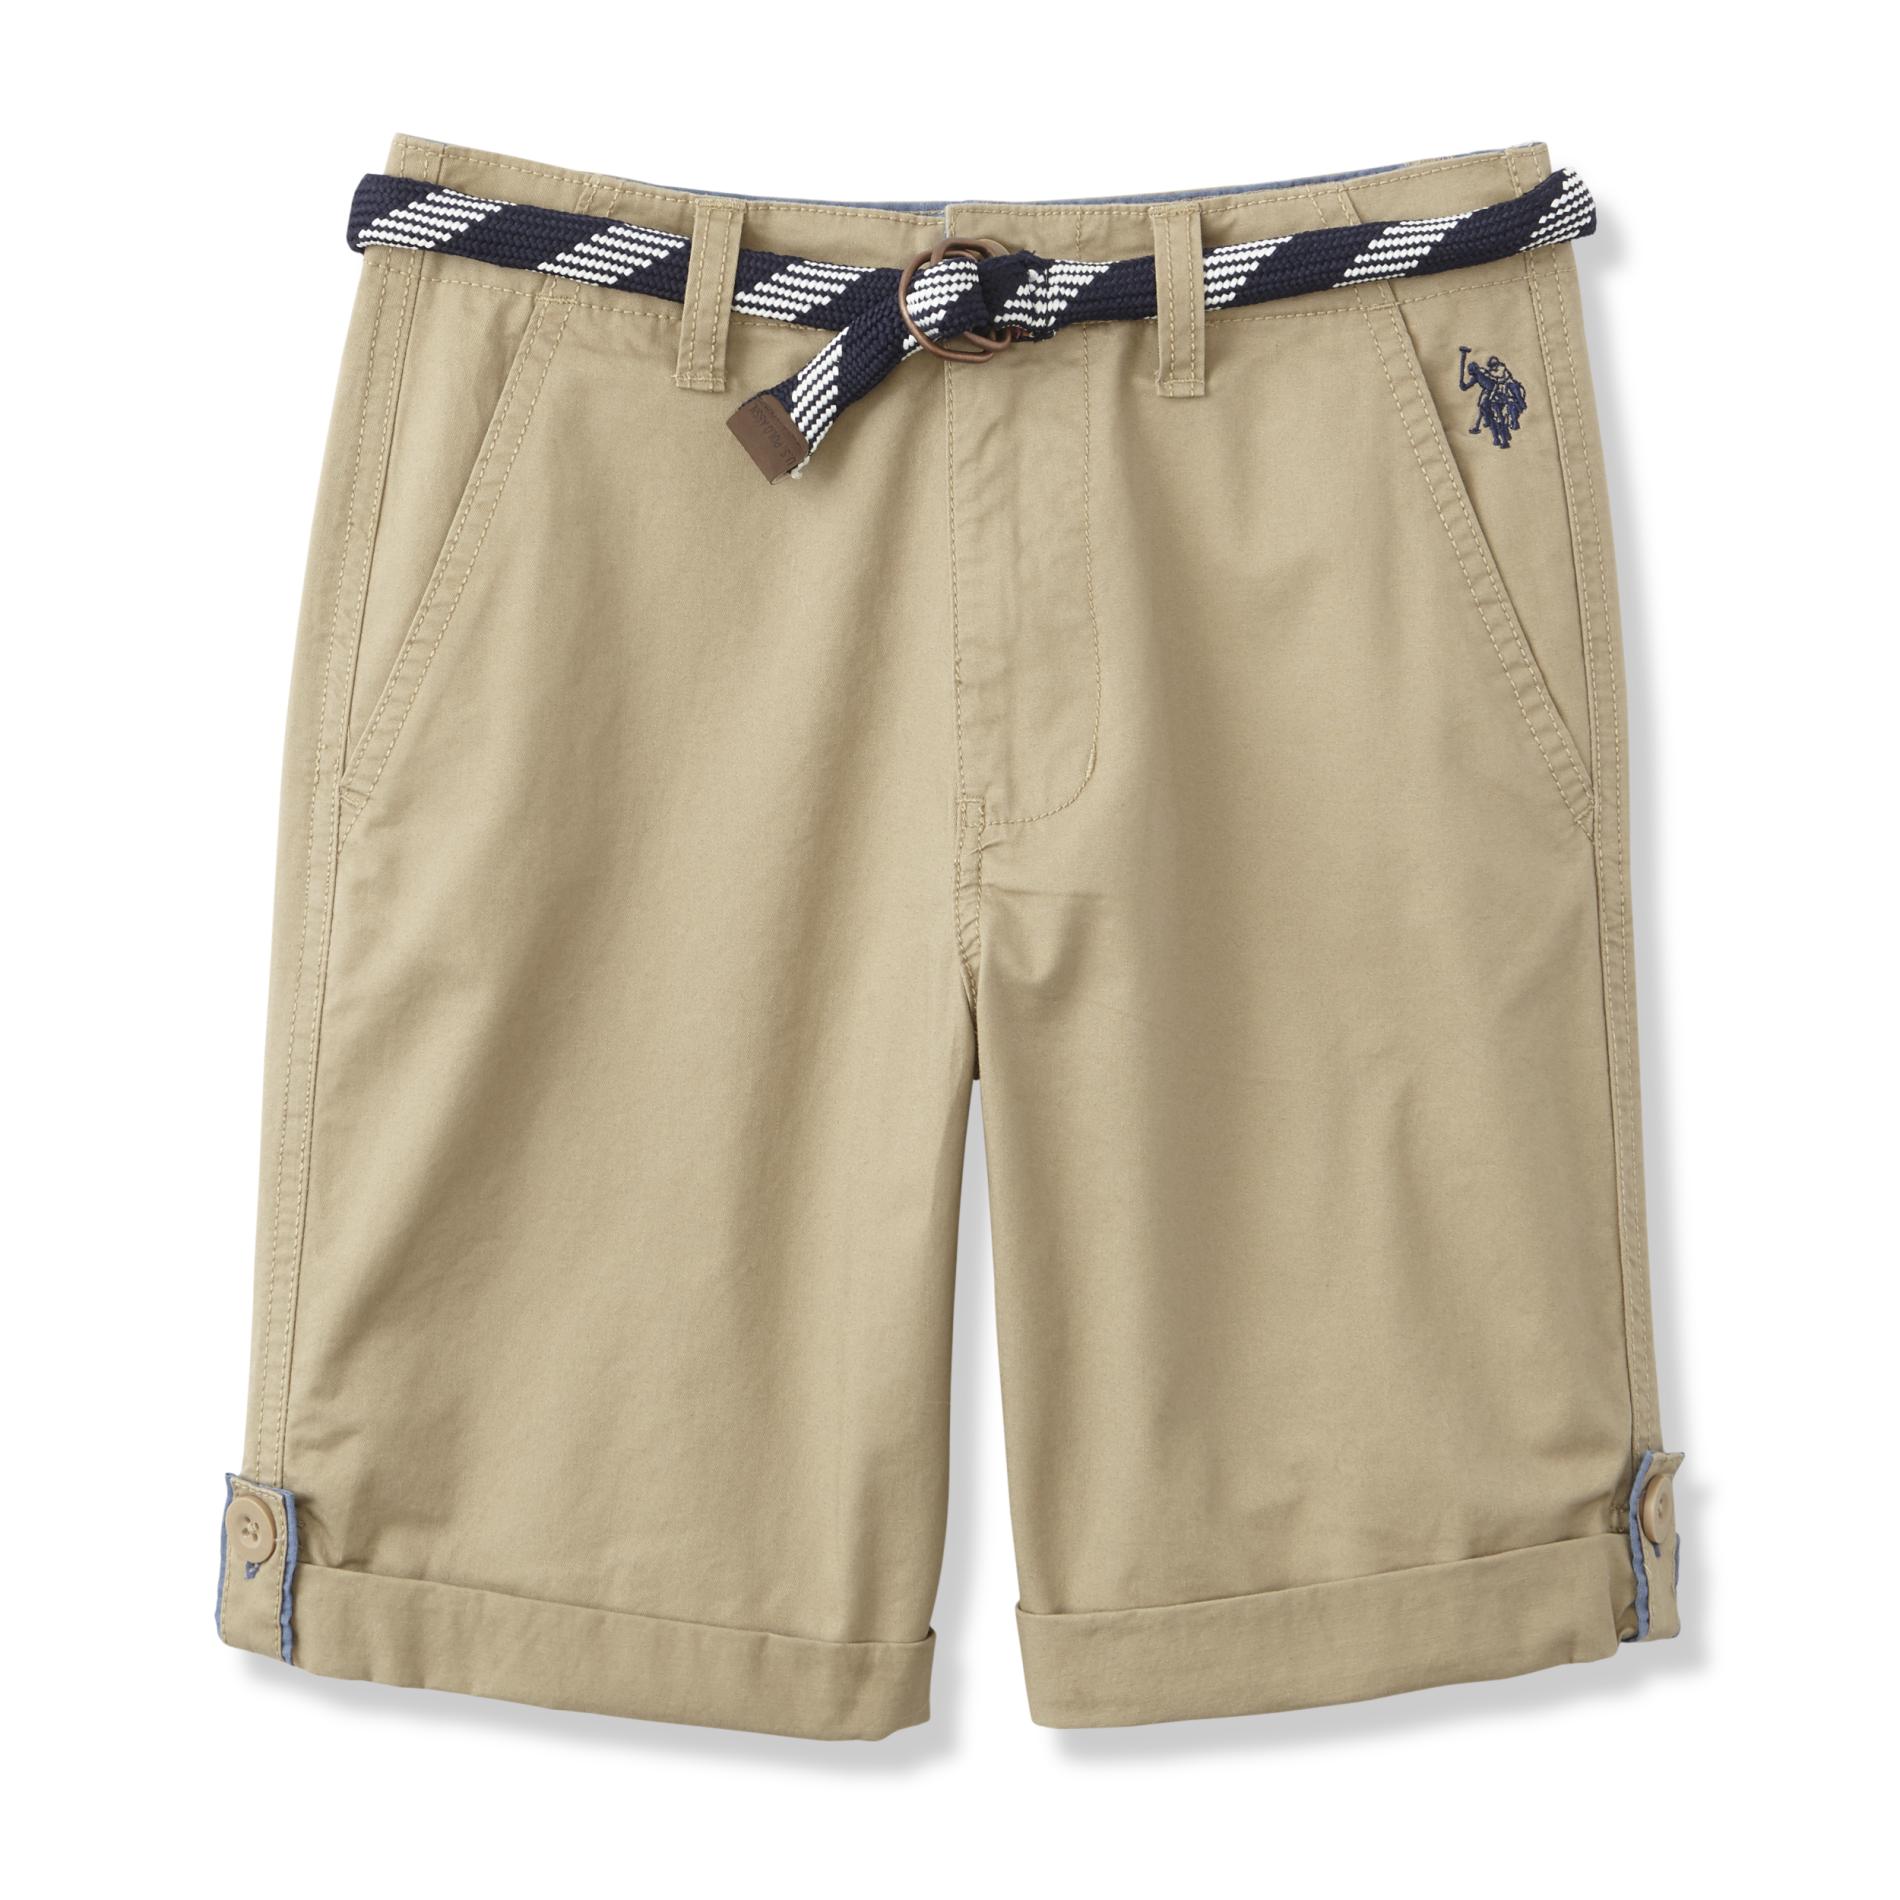 U.S. Polo Assn. Boys' Belted Shorts